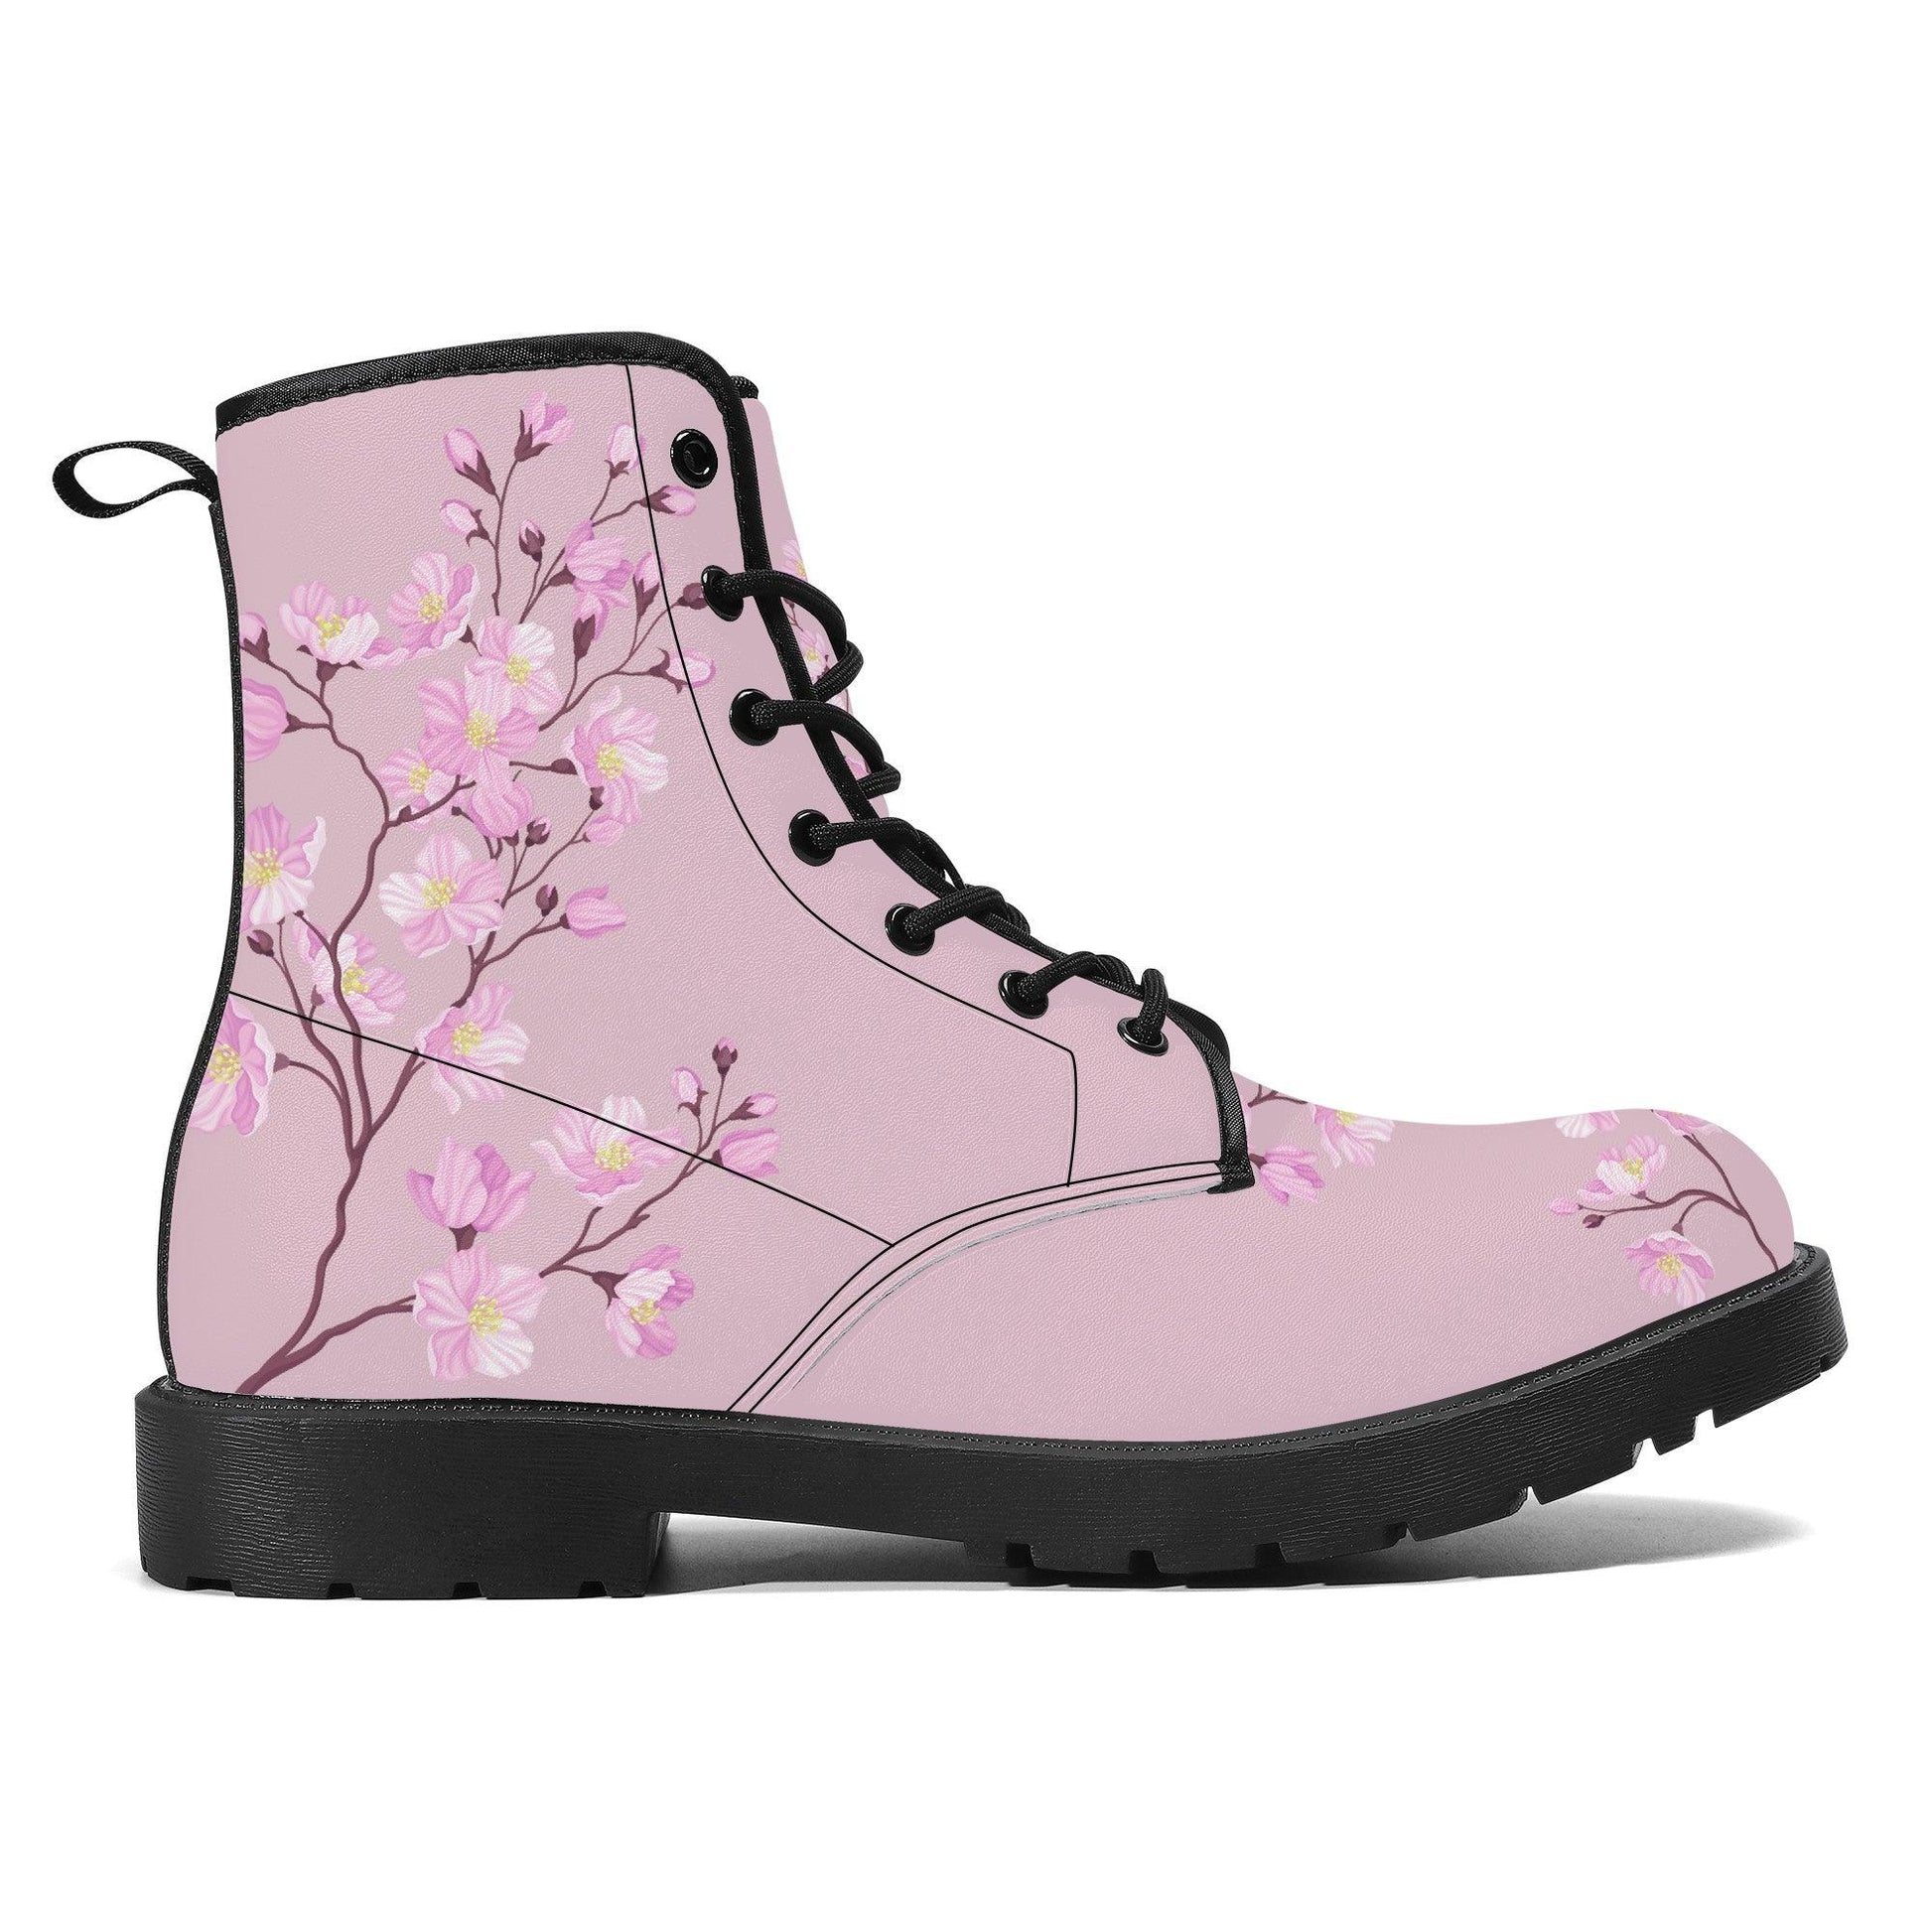 Pink Vegan Leather Boots with Cherry Blossom